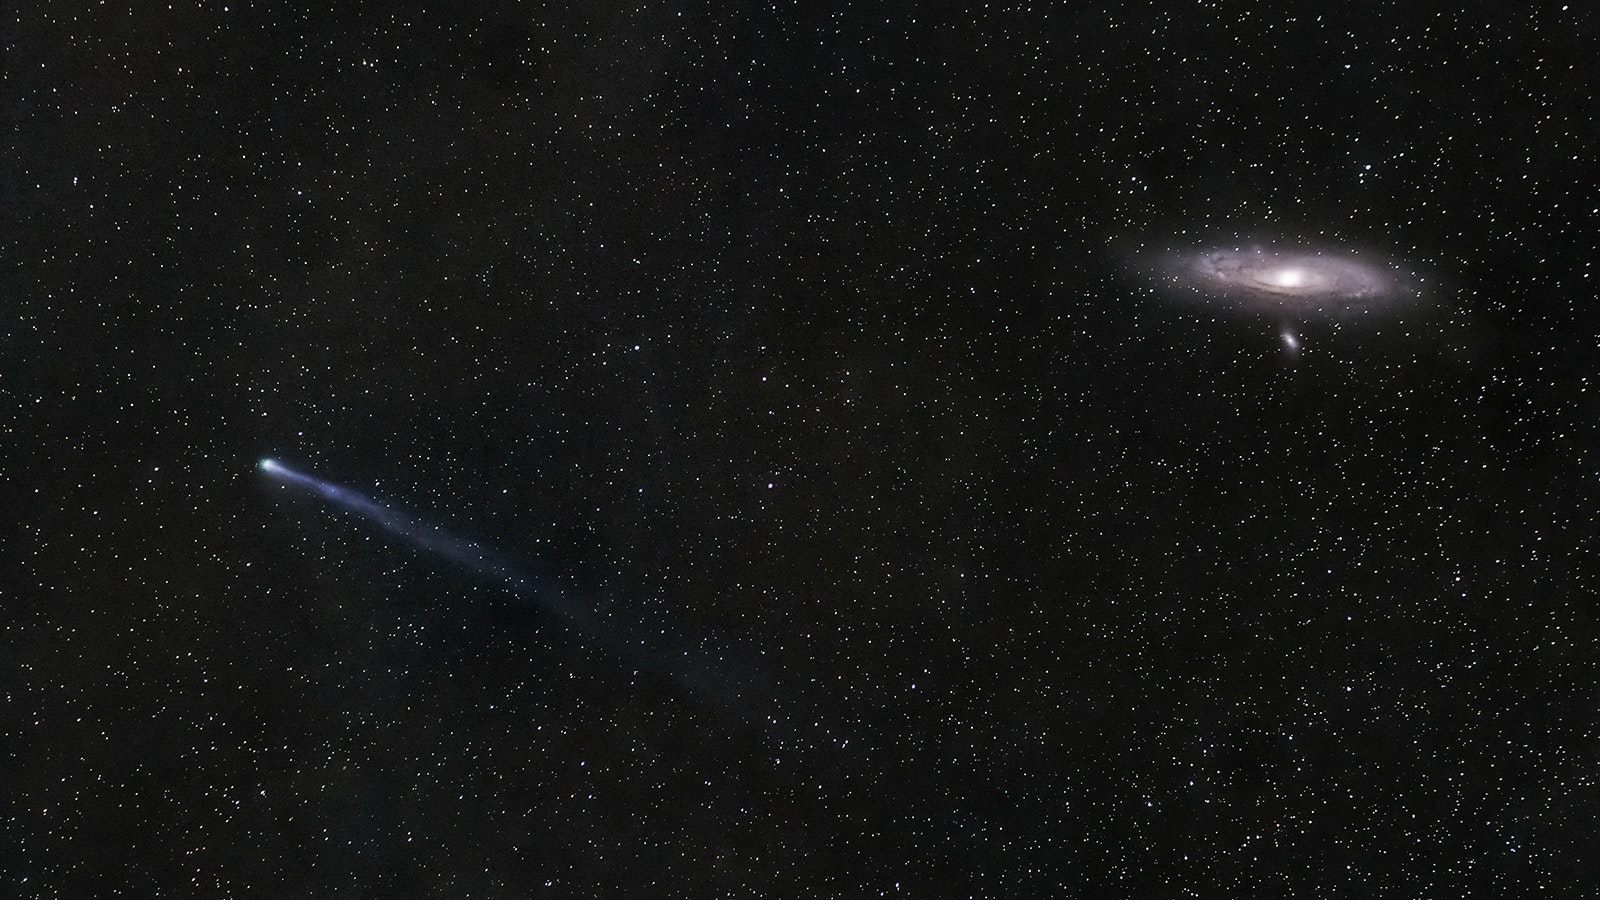 12P/Pons-Brooks, aka the devil comet, leaves a trail with Andromeda behind it in this view.